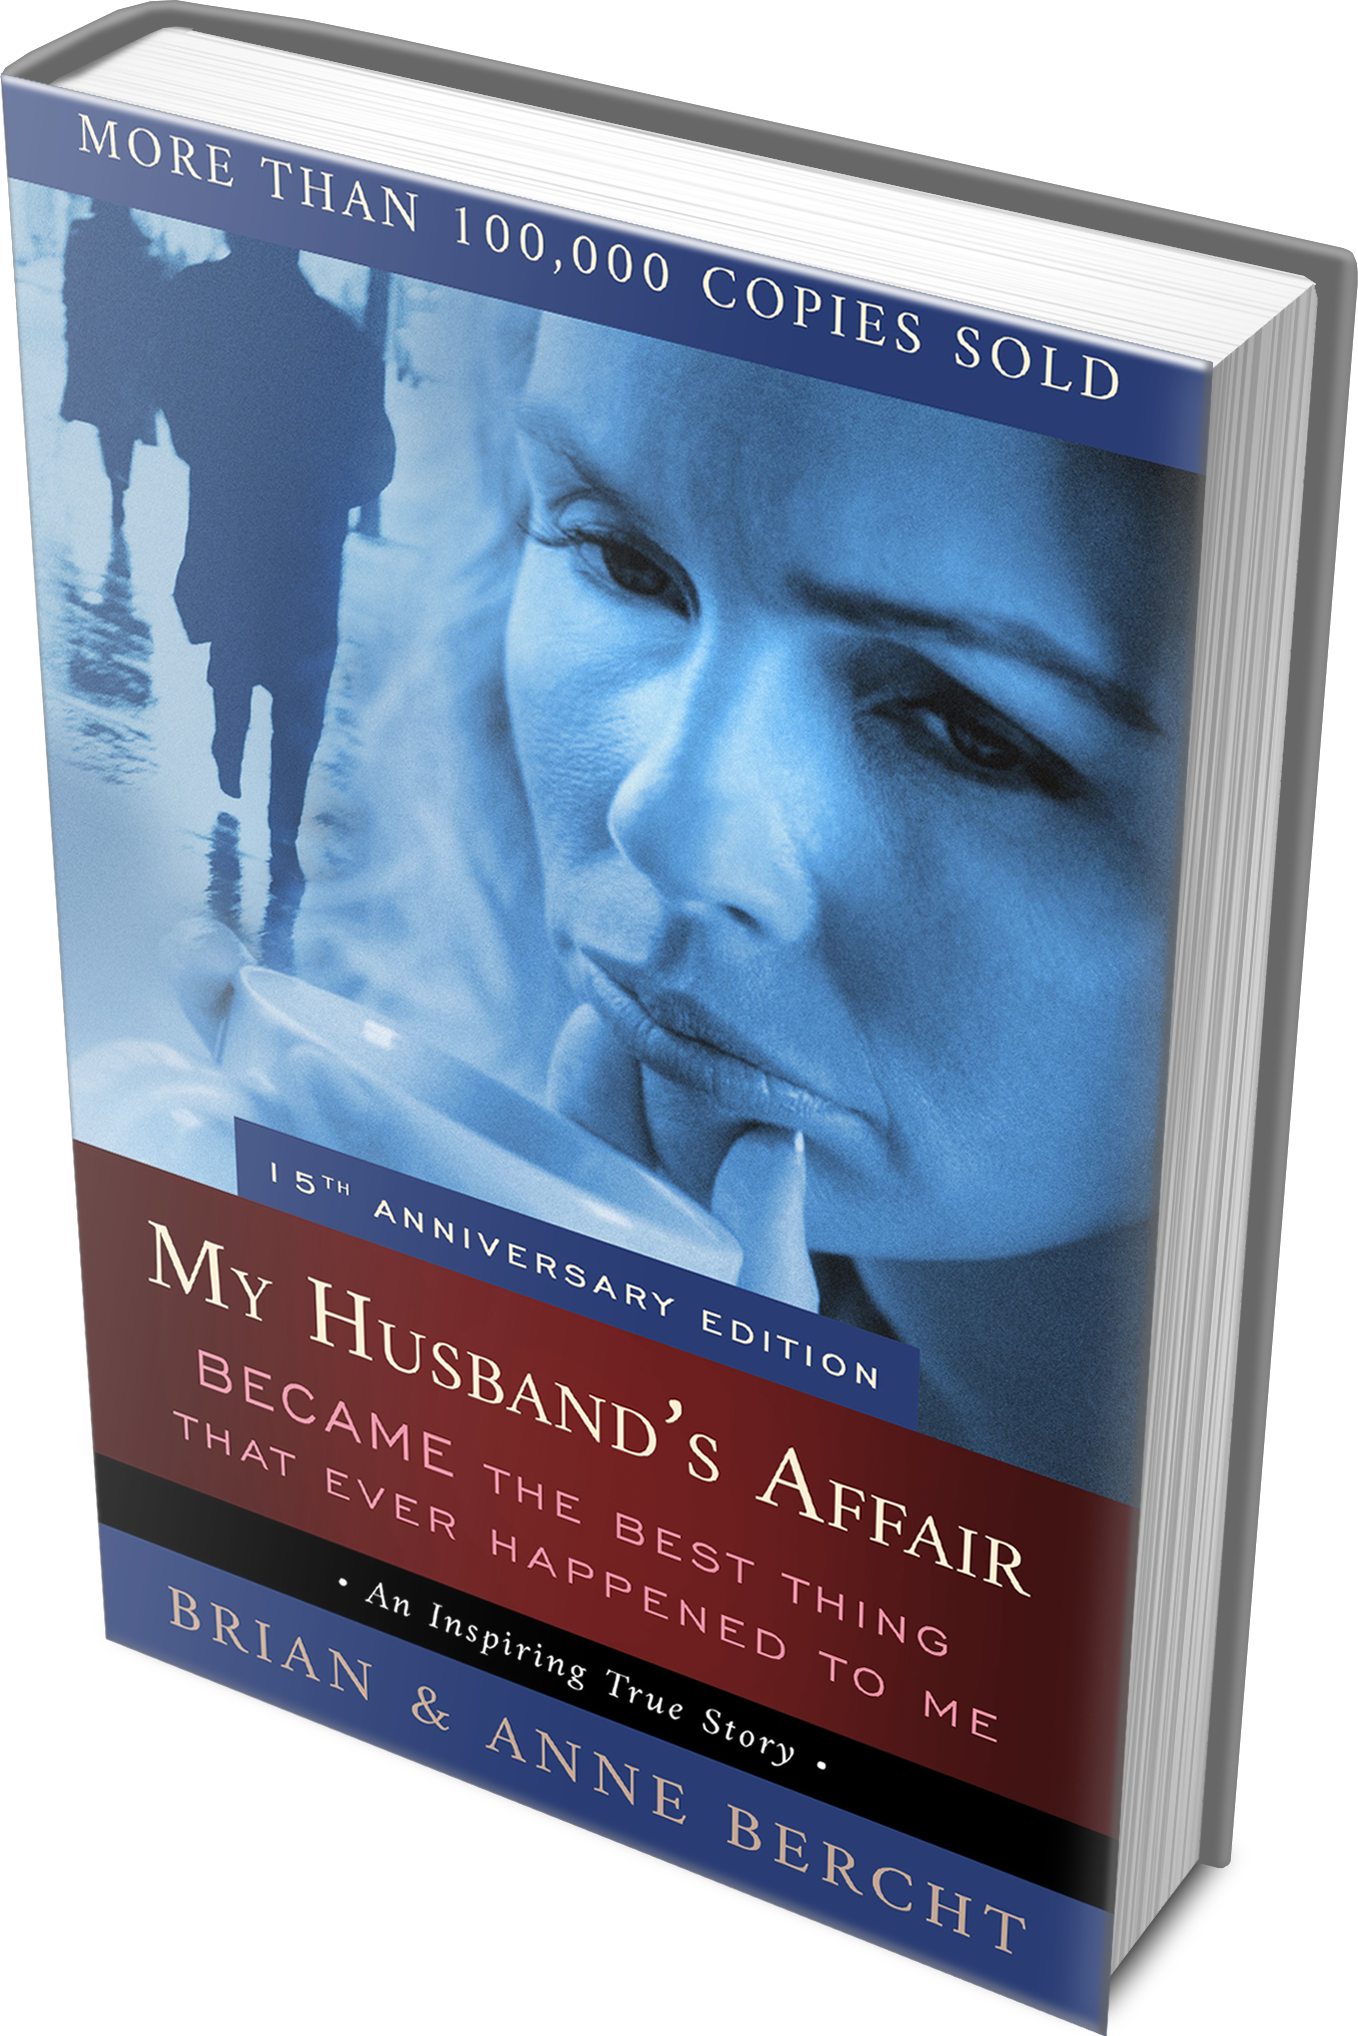 Anne Bercht book My Husband's Affair Became The Best Thing That Ever Happened To Me